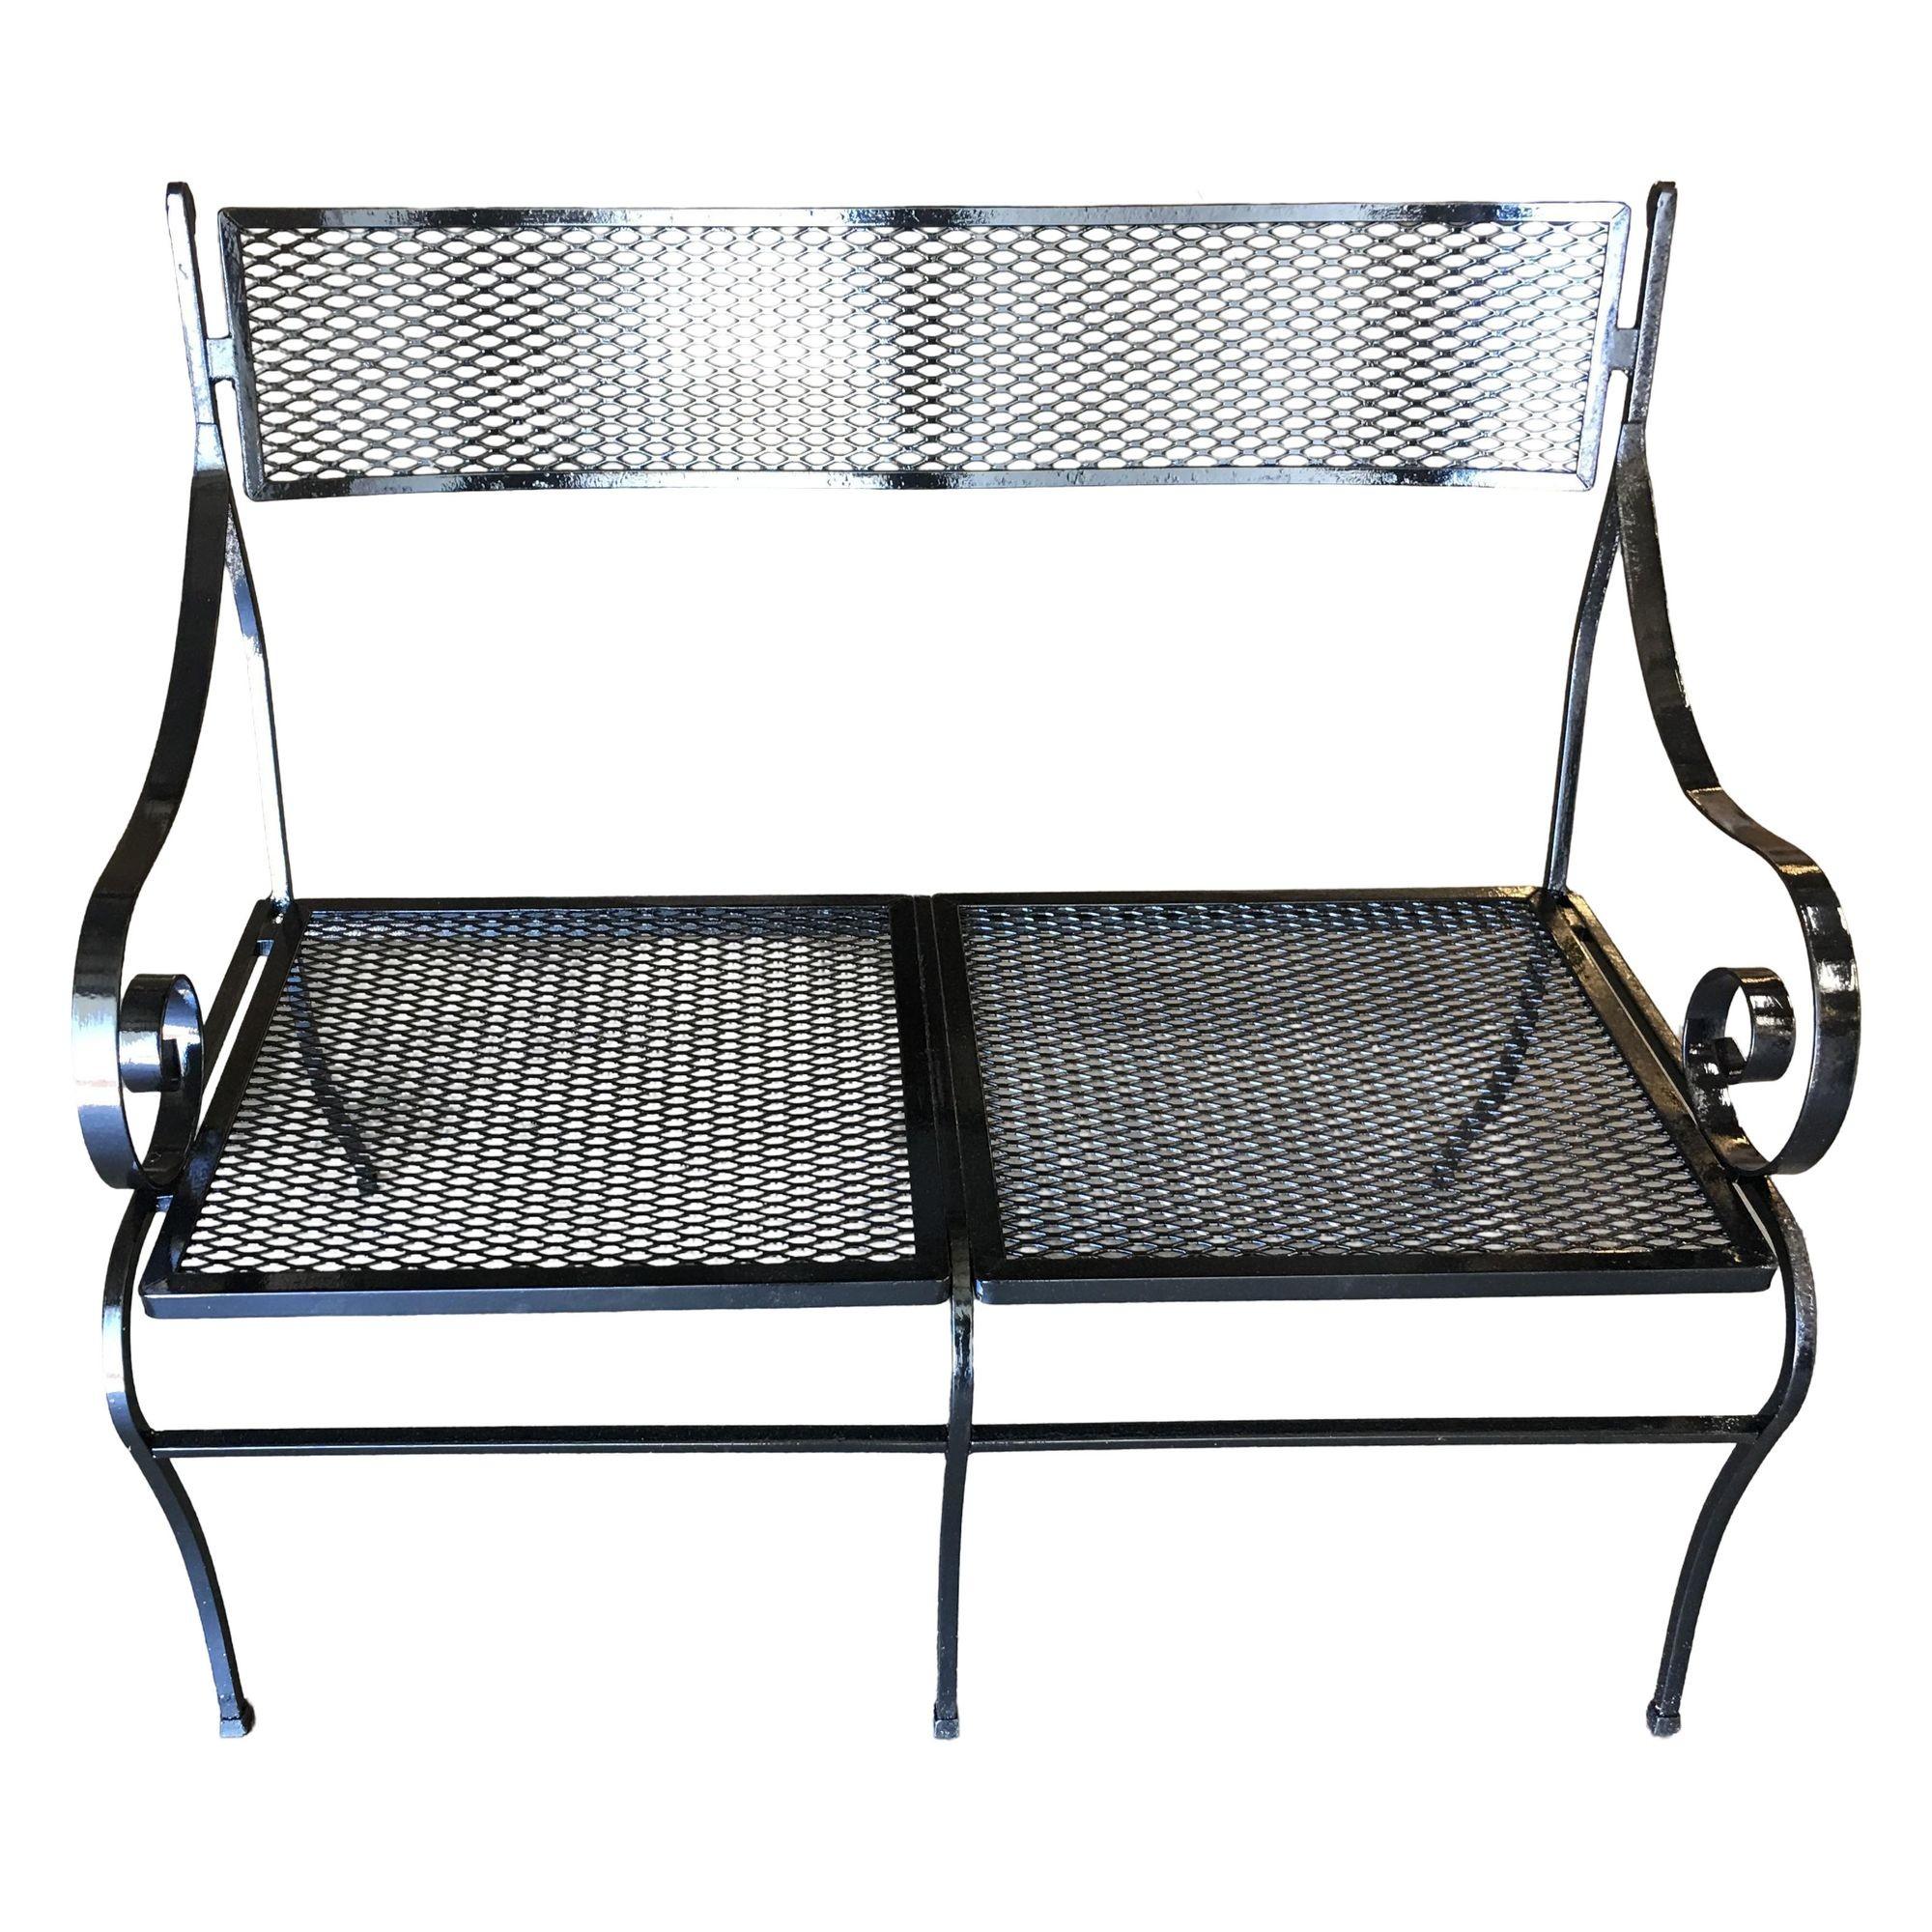 Mesh wrought iron outdoor garden loveseat bench with scrolling arms by the Woodard Company, circa 1950 all outdoor furniture can be repainted in the color of the buyers choice at no extra charge.